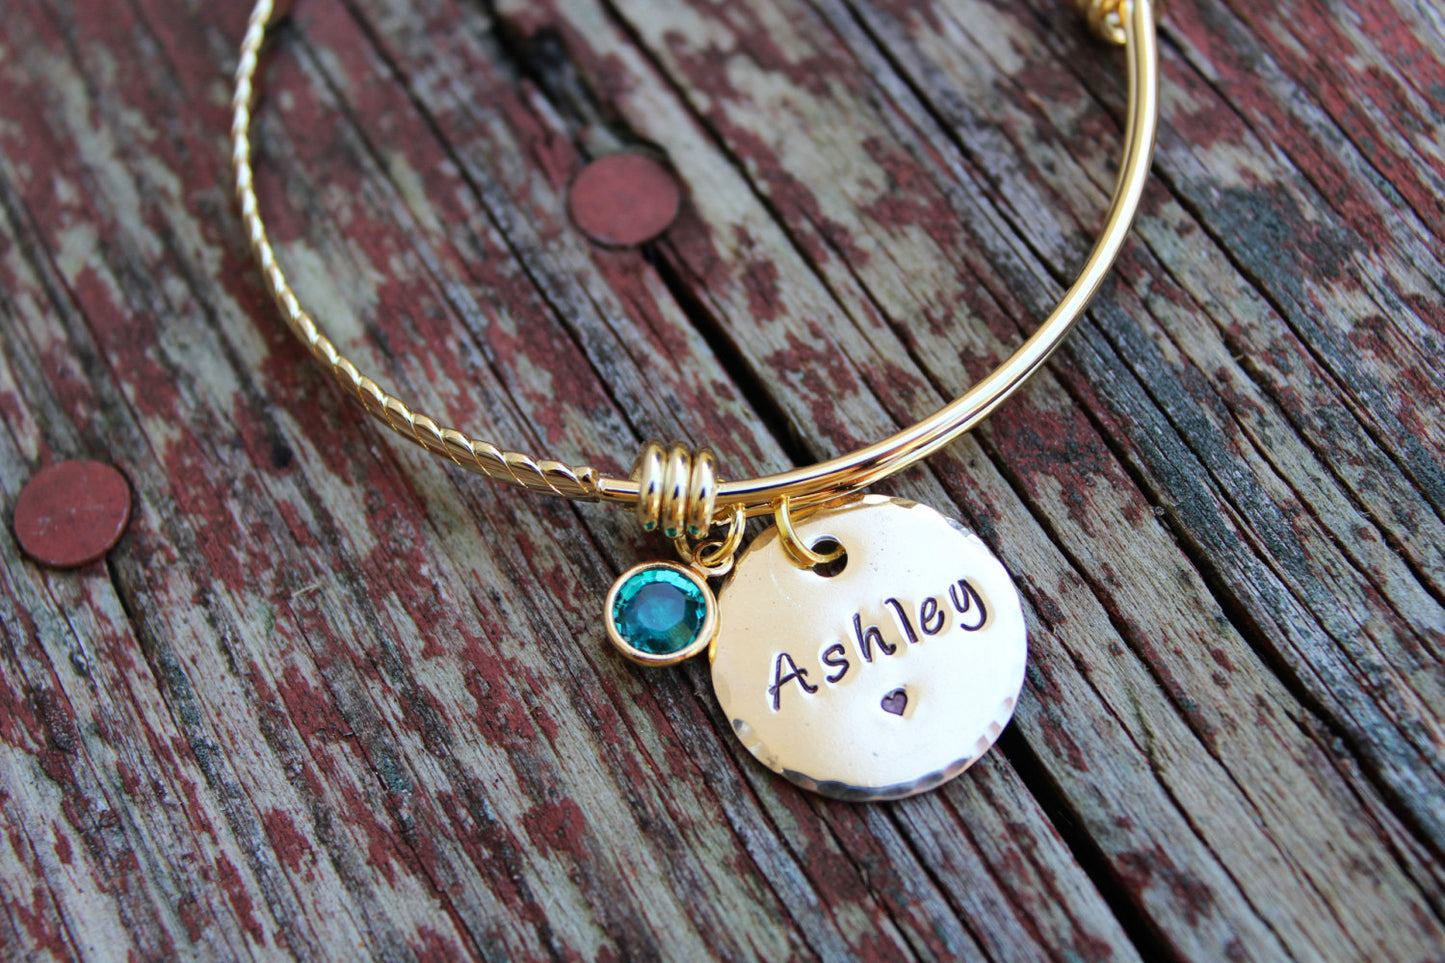 Hand Stamped Bangle Bracelet, Personalized Mommy Bracelet, Gold Mother Jewelry, Initial Bangles, Gift for Mom, New Mom Gift